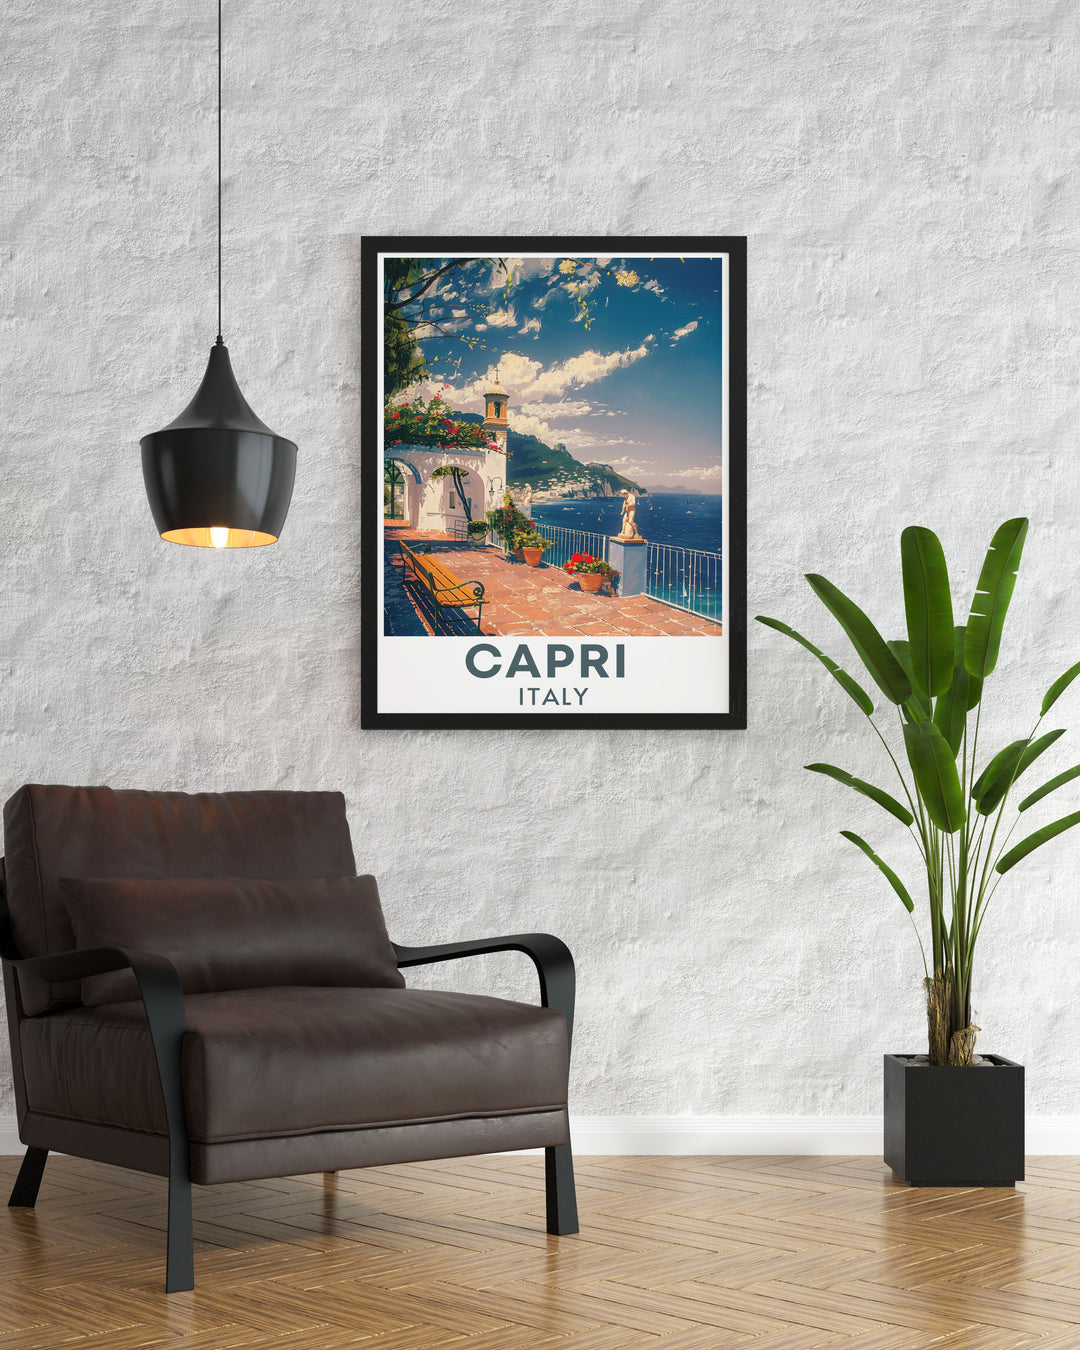 Villa San Michele of Capri is beautifully depicted in this travel poster, showcasing its stunning views and tranquil gardens. Bring a touch of Italys captivating charm into your living space with this exquisite artwork.